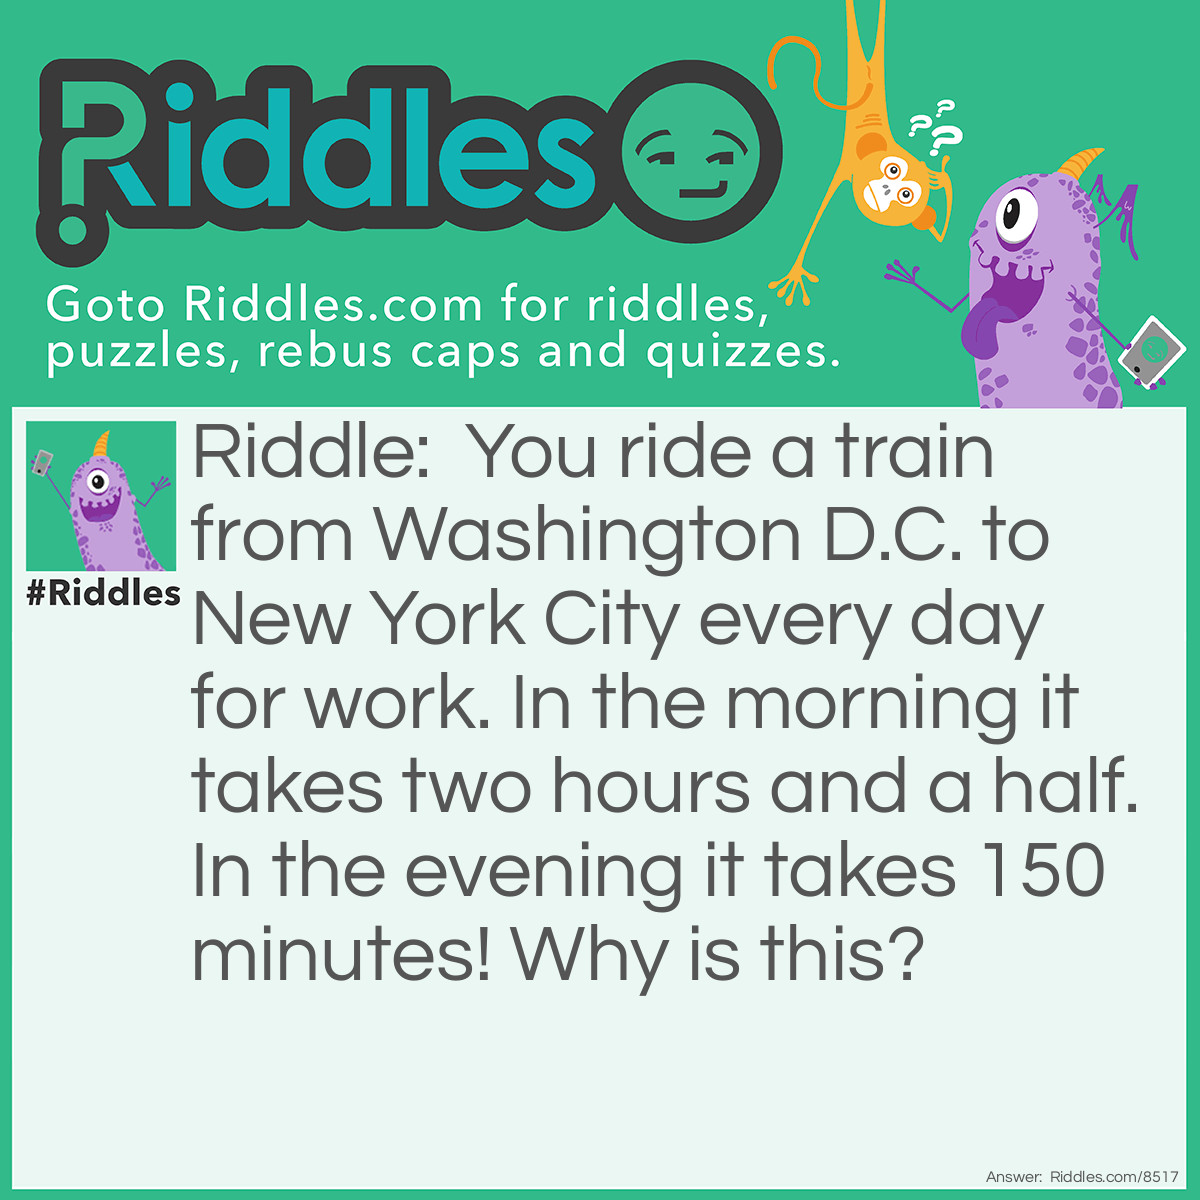 Riddle: You ride a train from Washington D.C. to New York City every day for work. In the morning it takes two hours and a half. In the evening it takes 150 minutes! Why is this? Answer: 150 minutes are the same as two hours and a half!